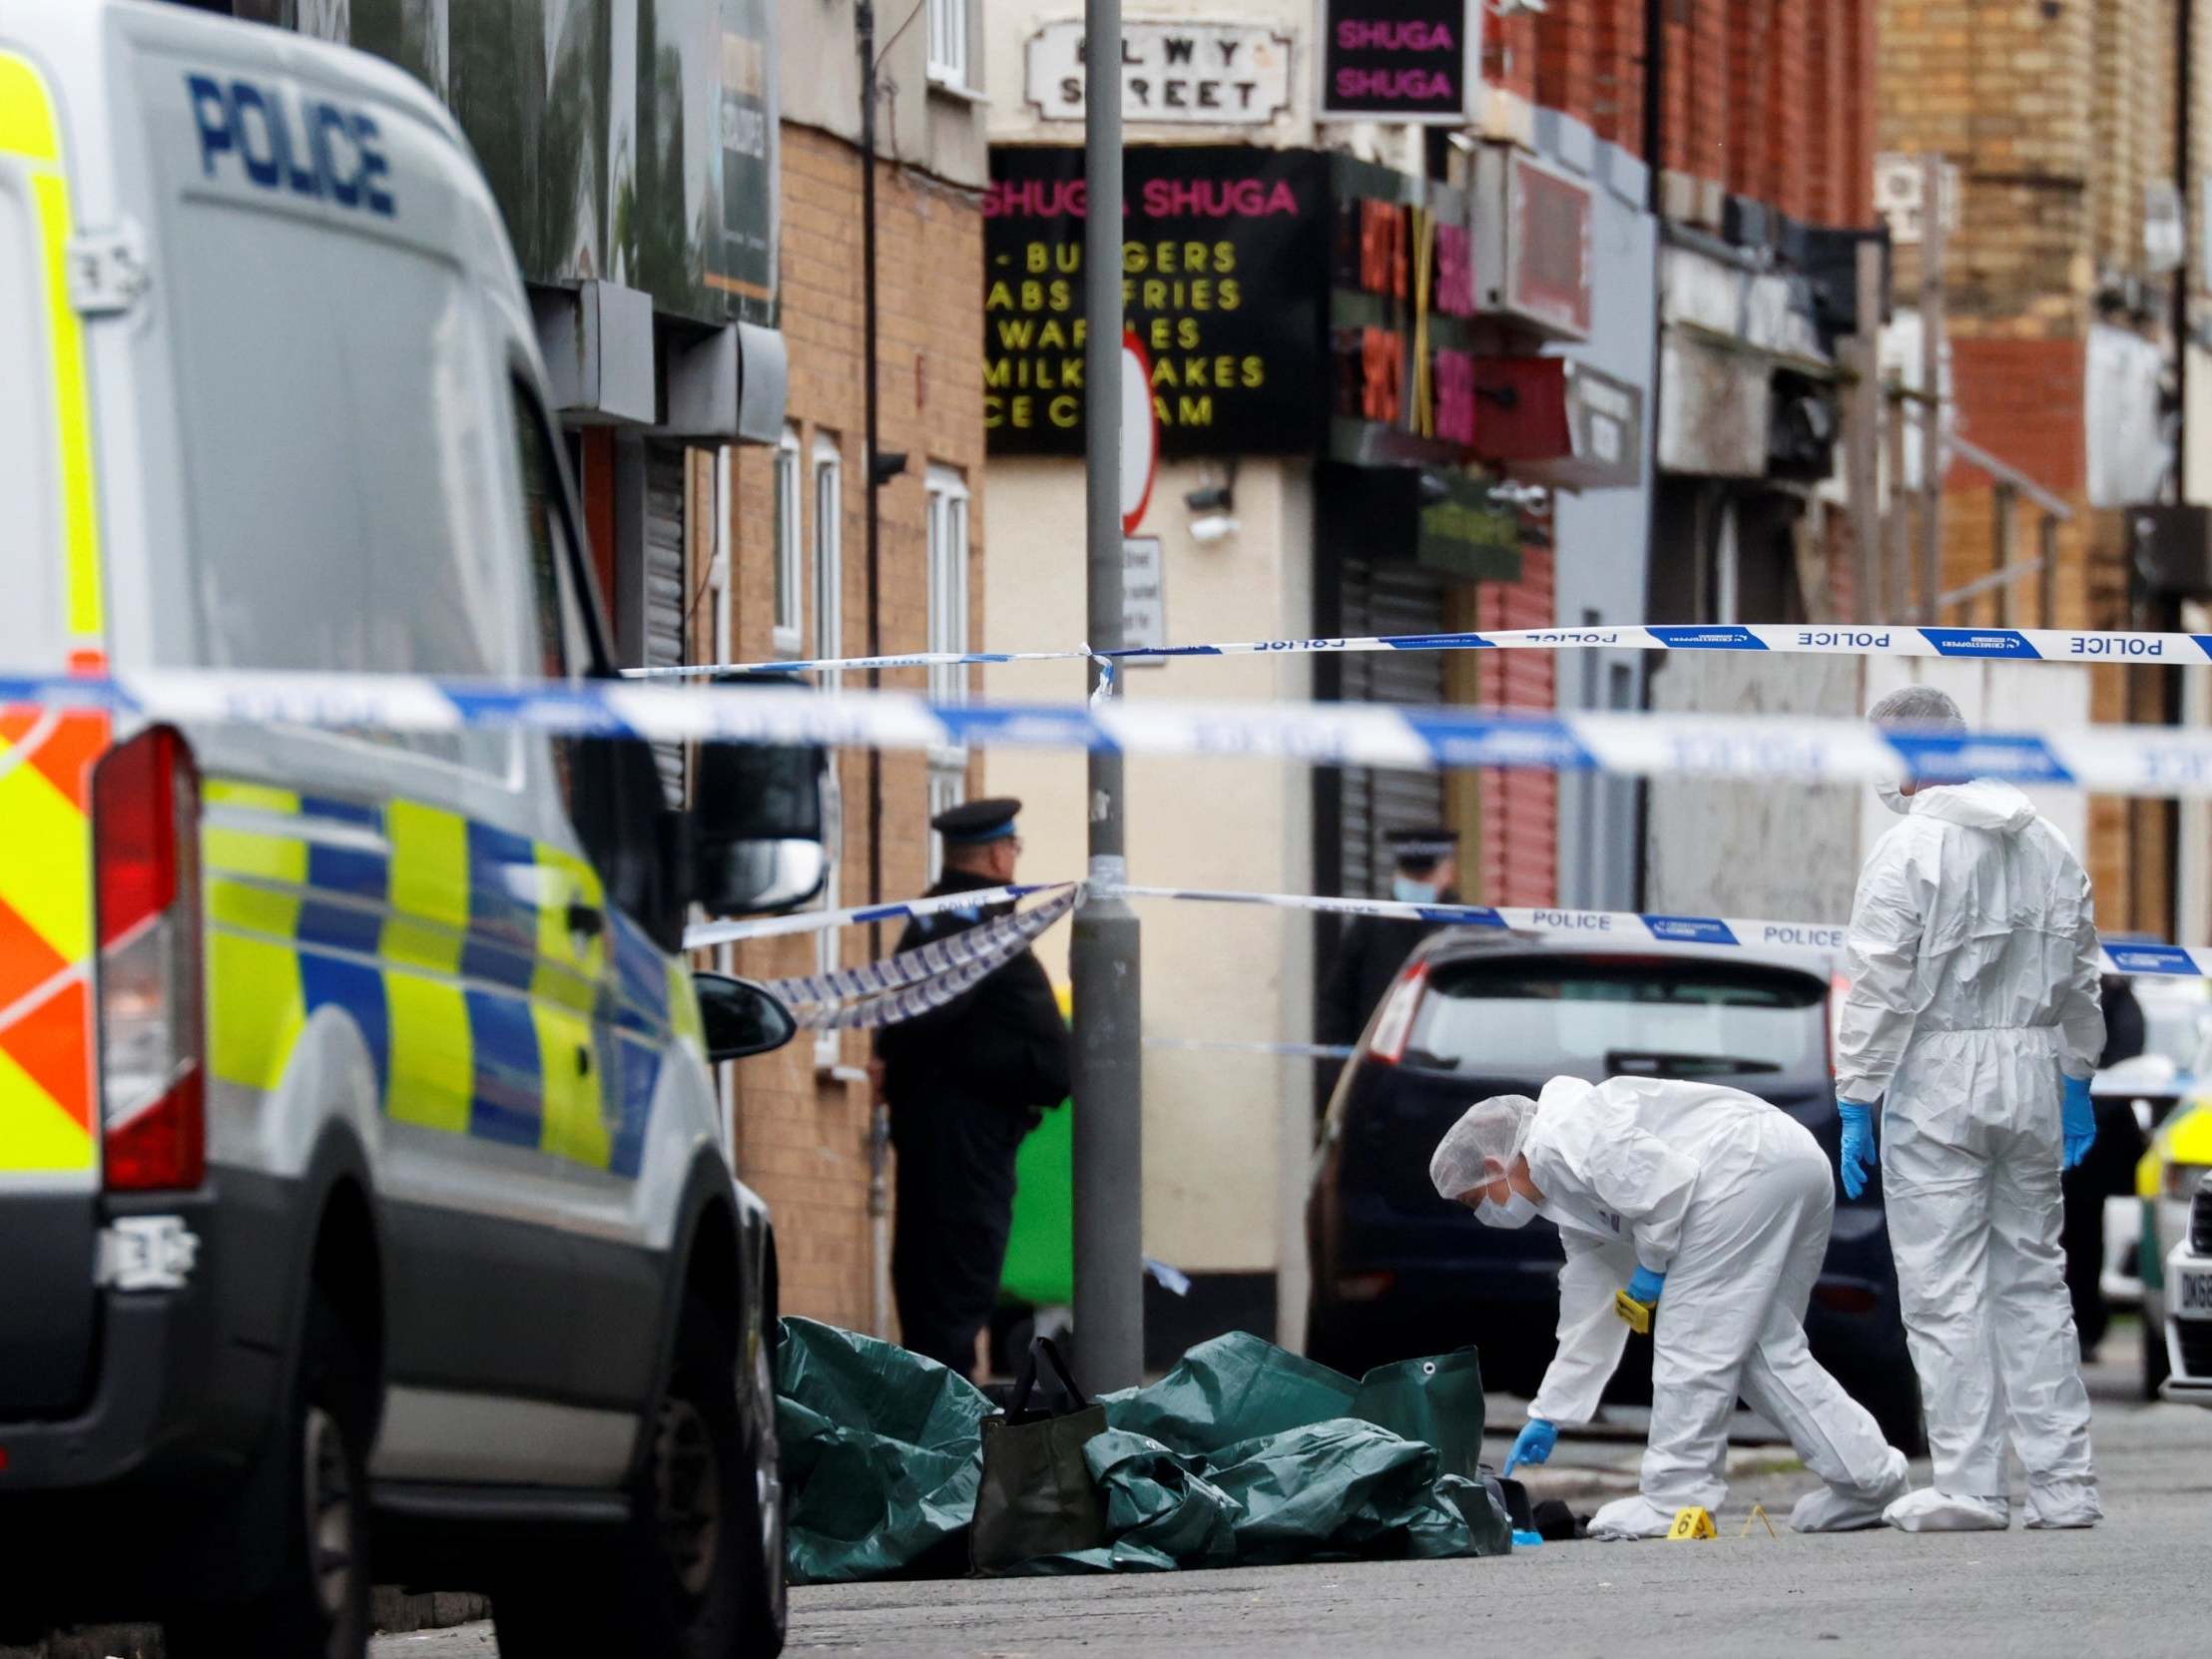 Liverpool shooting: Woman with knife shot by police thumbnail